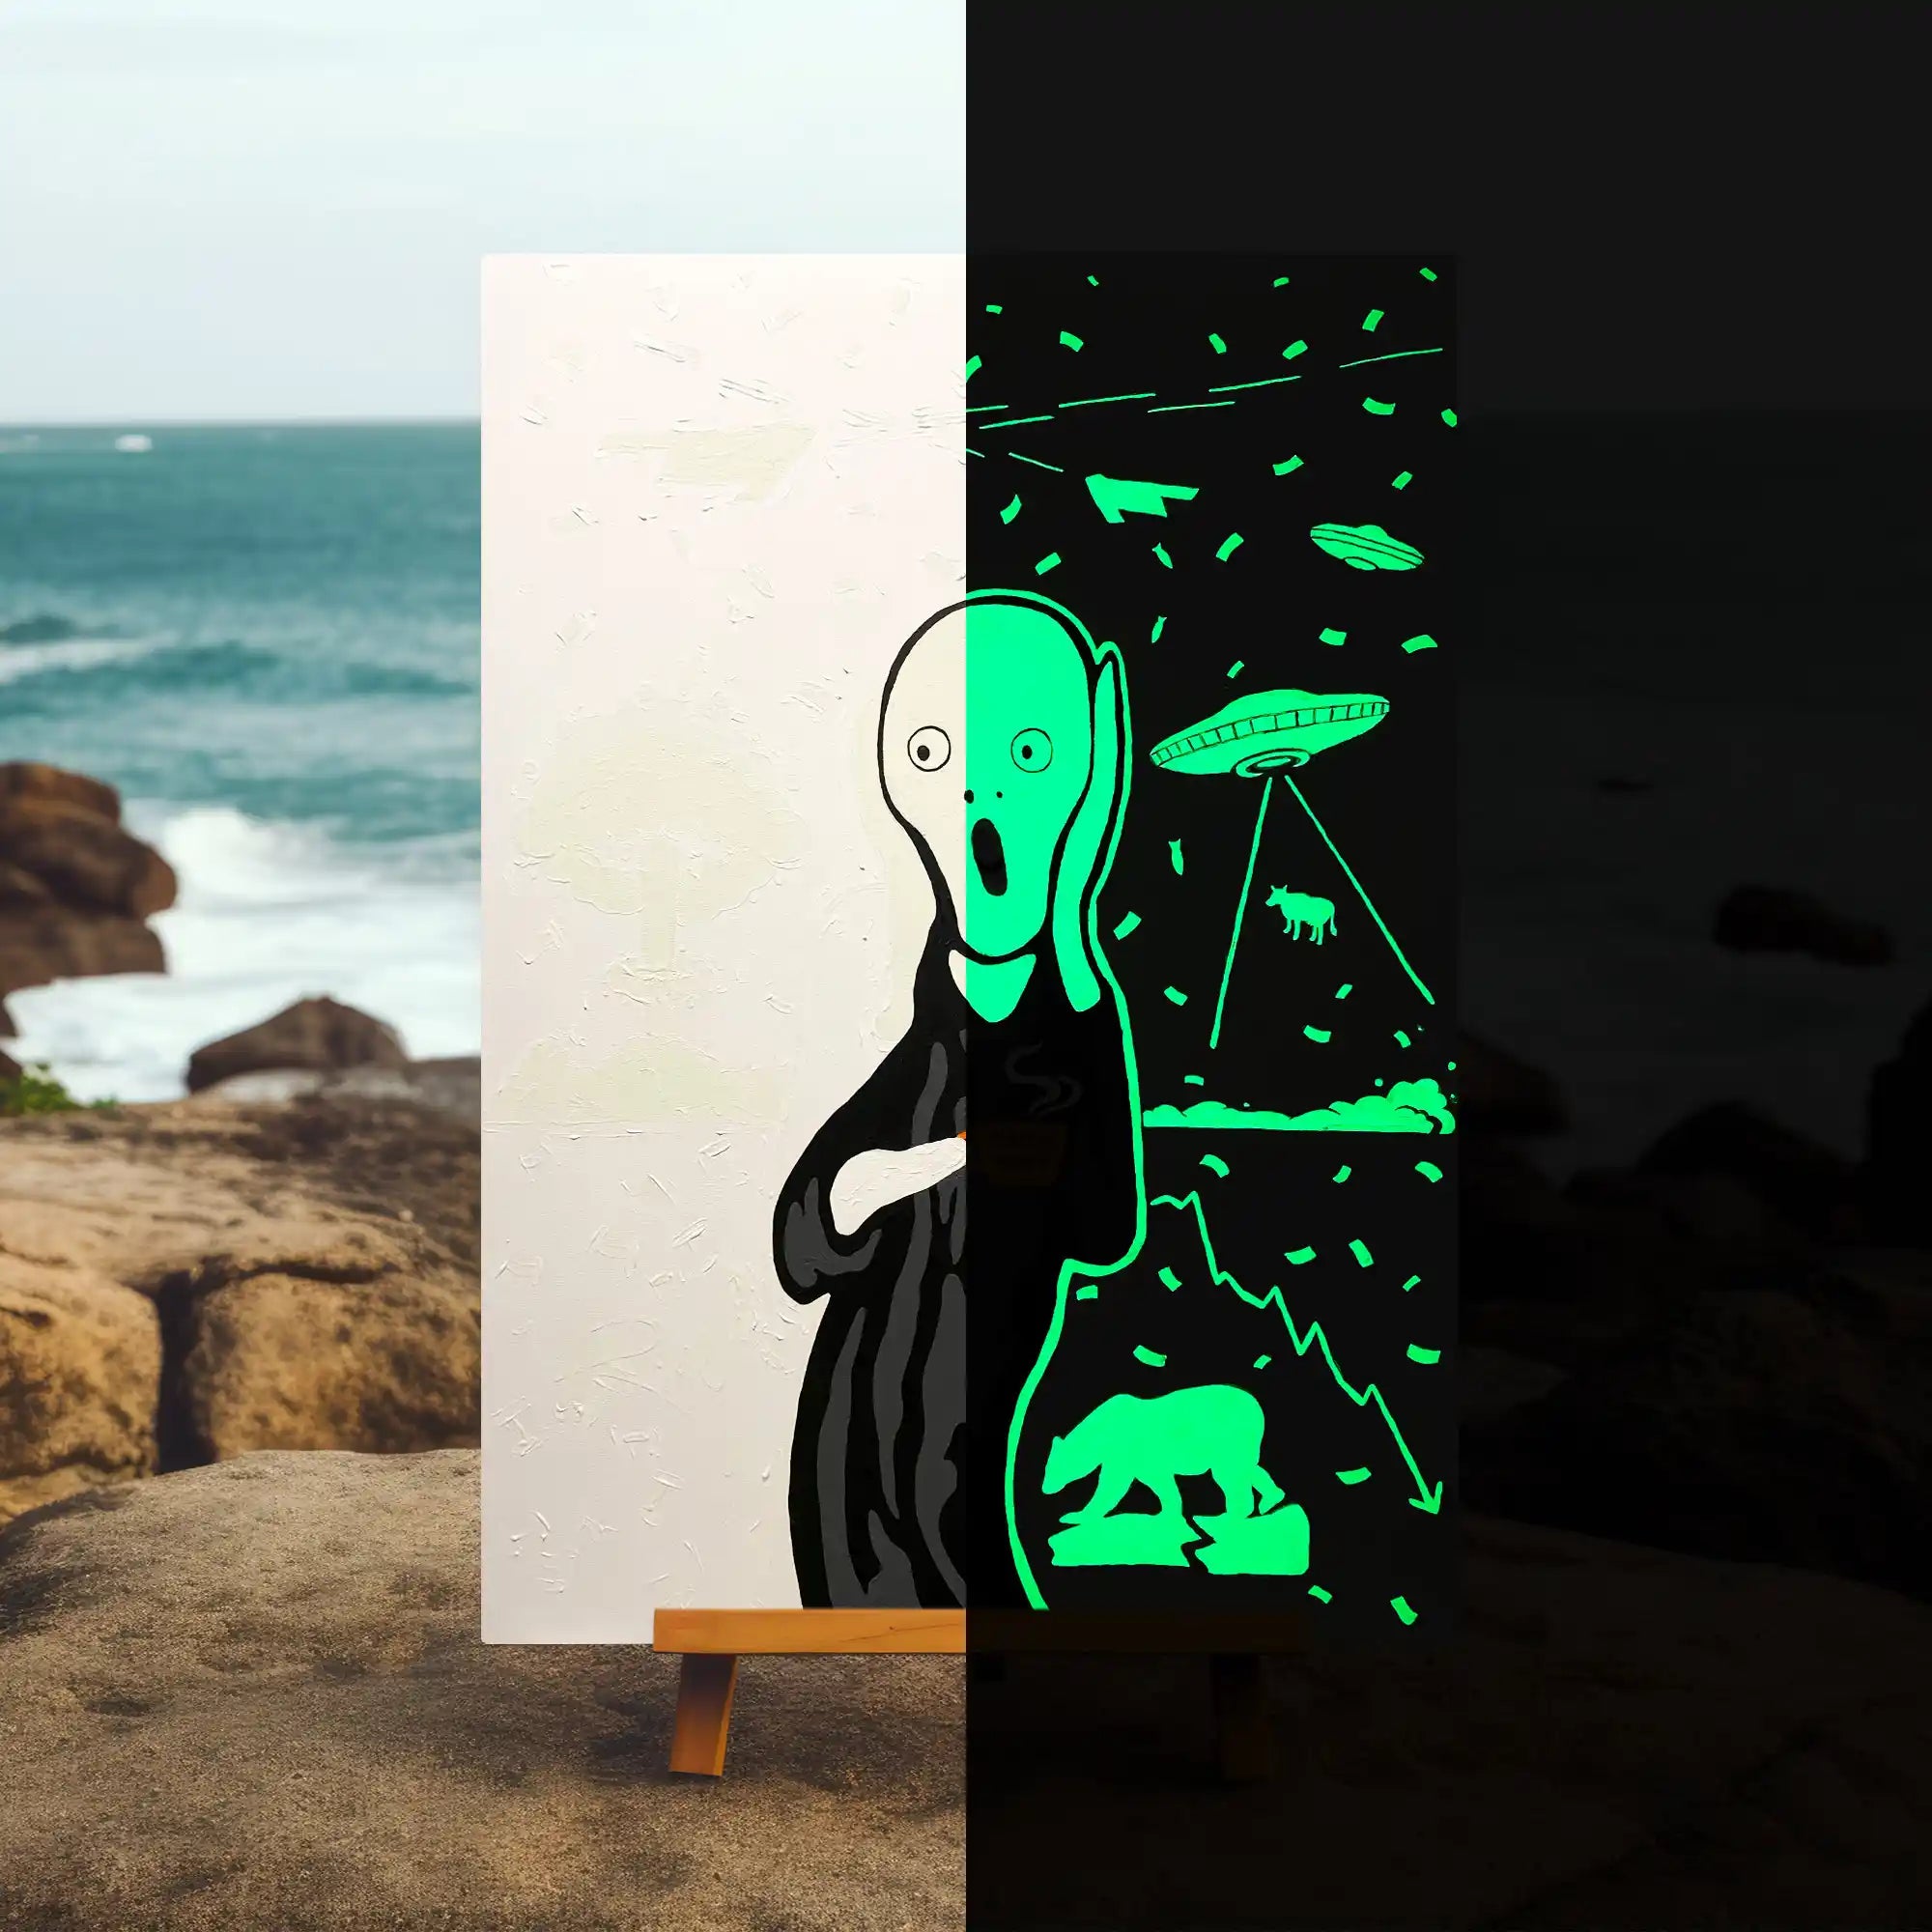 Glow in the dark The scream Painting on a stand on rocks showing day and night effects